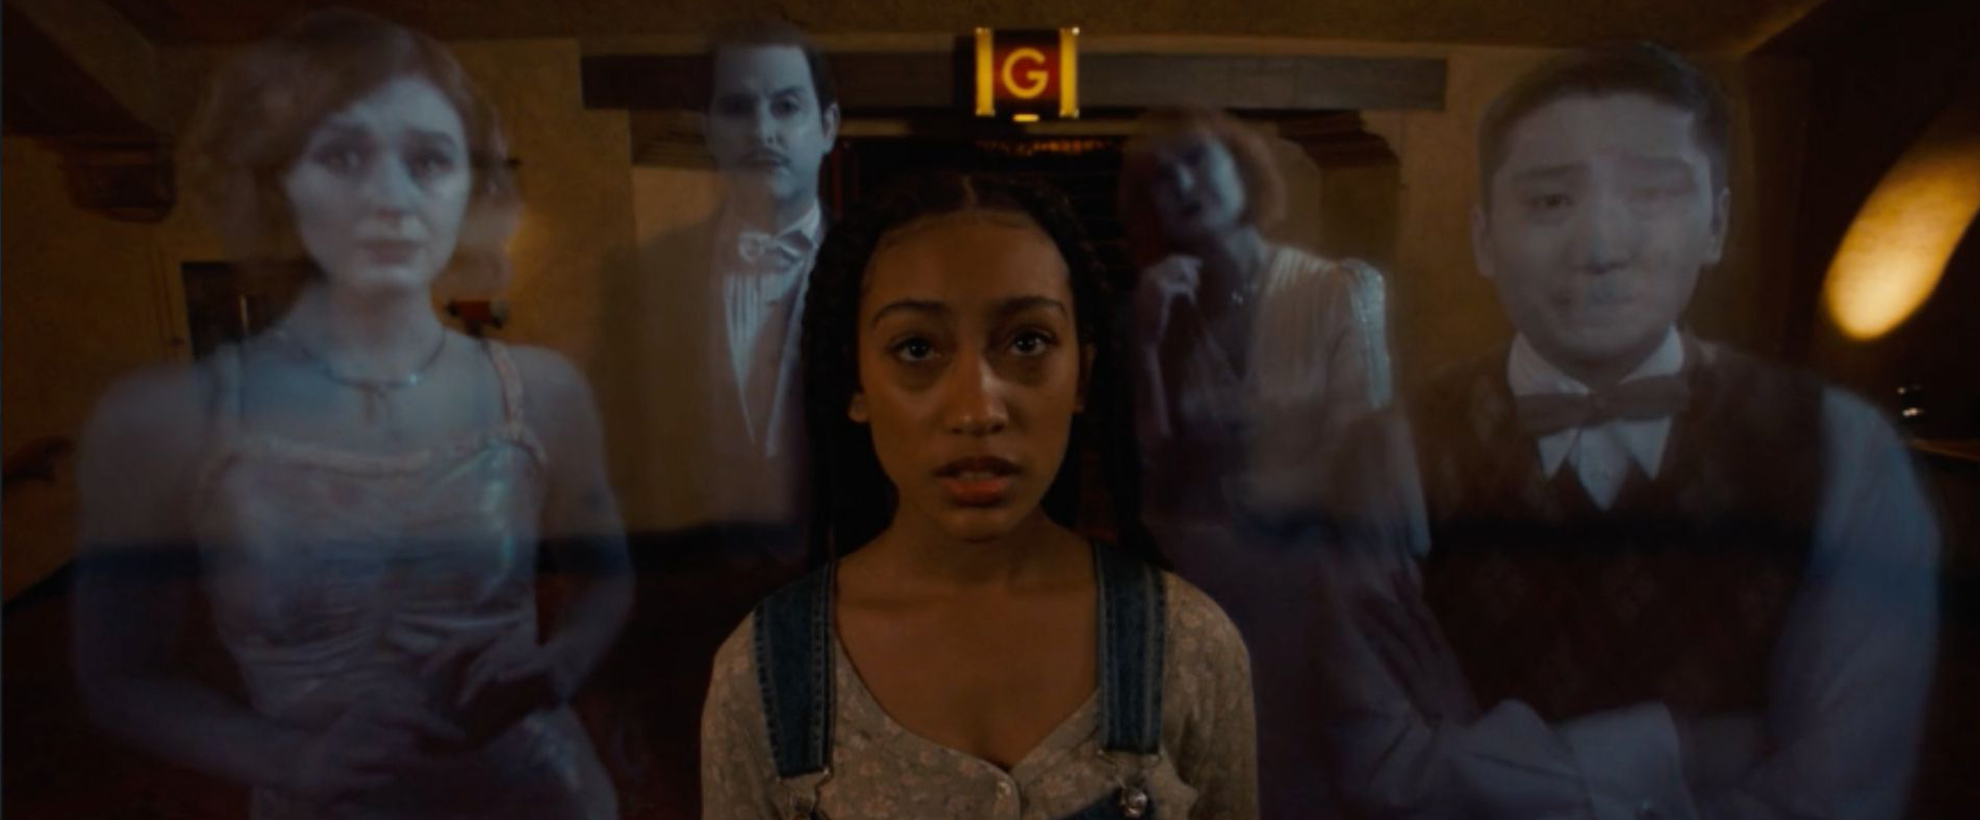 A young black woman in a hallway, surrounded by 4 ghosts